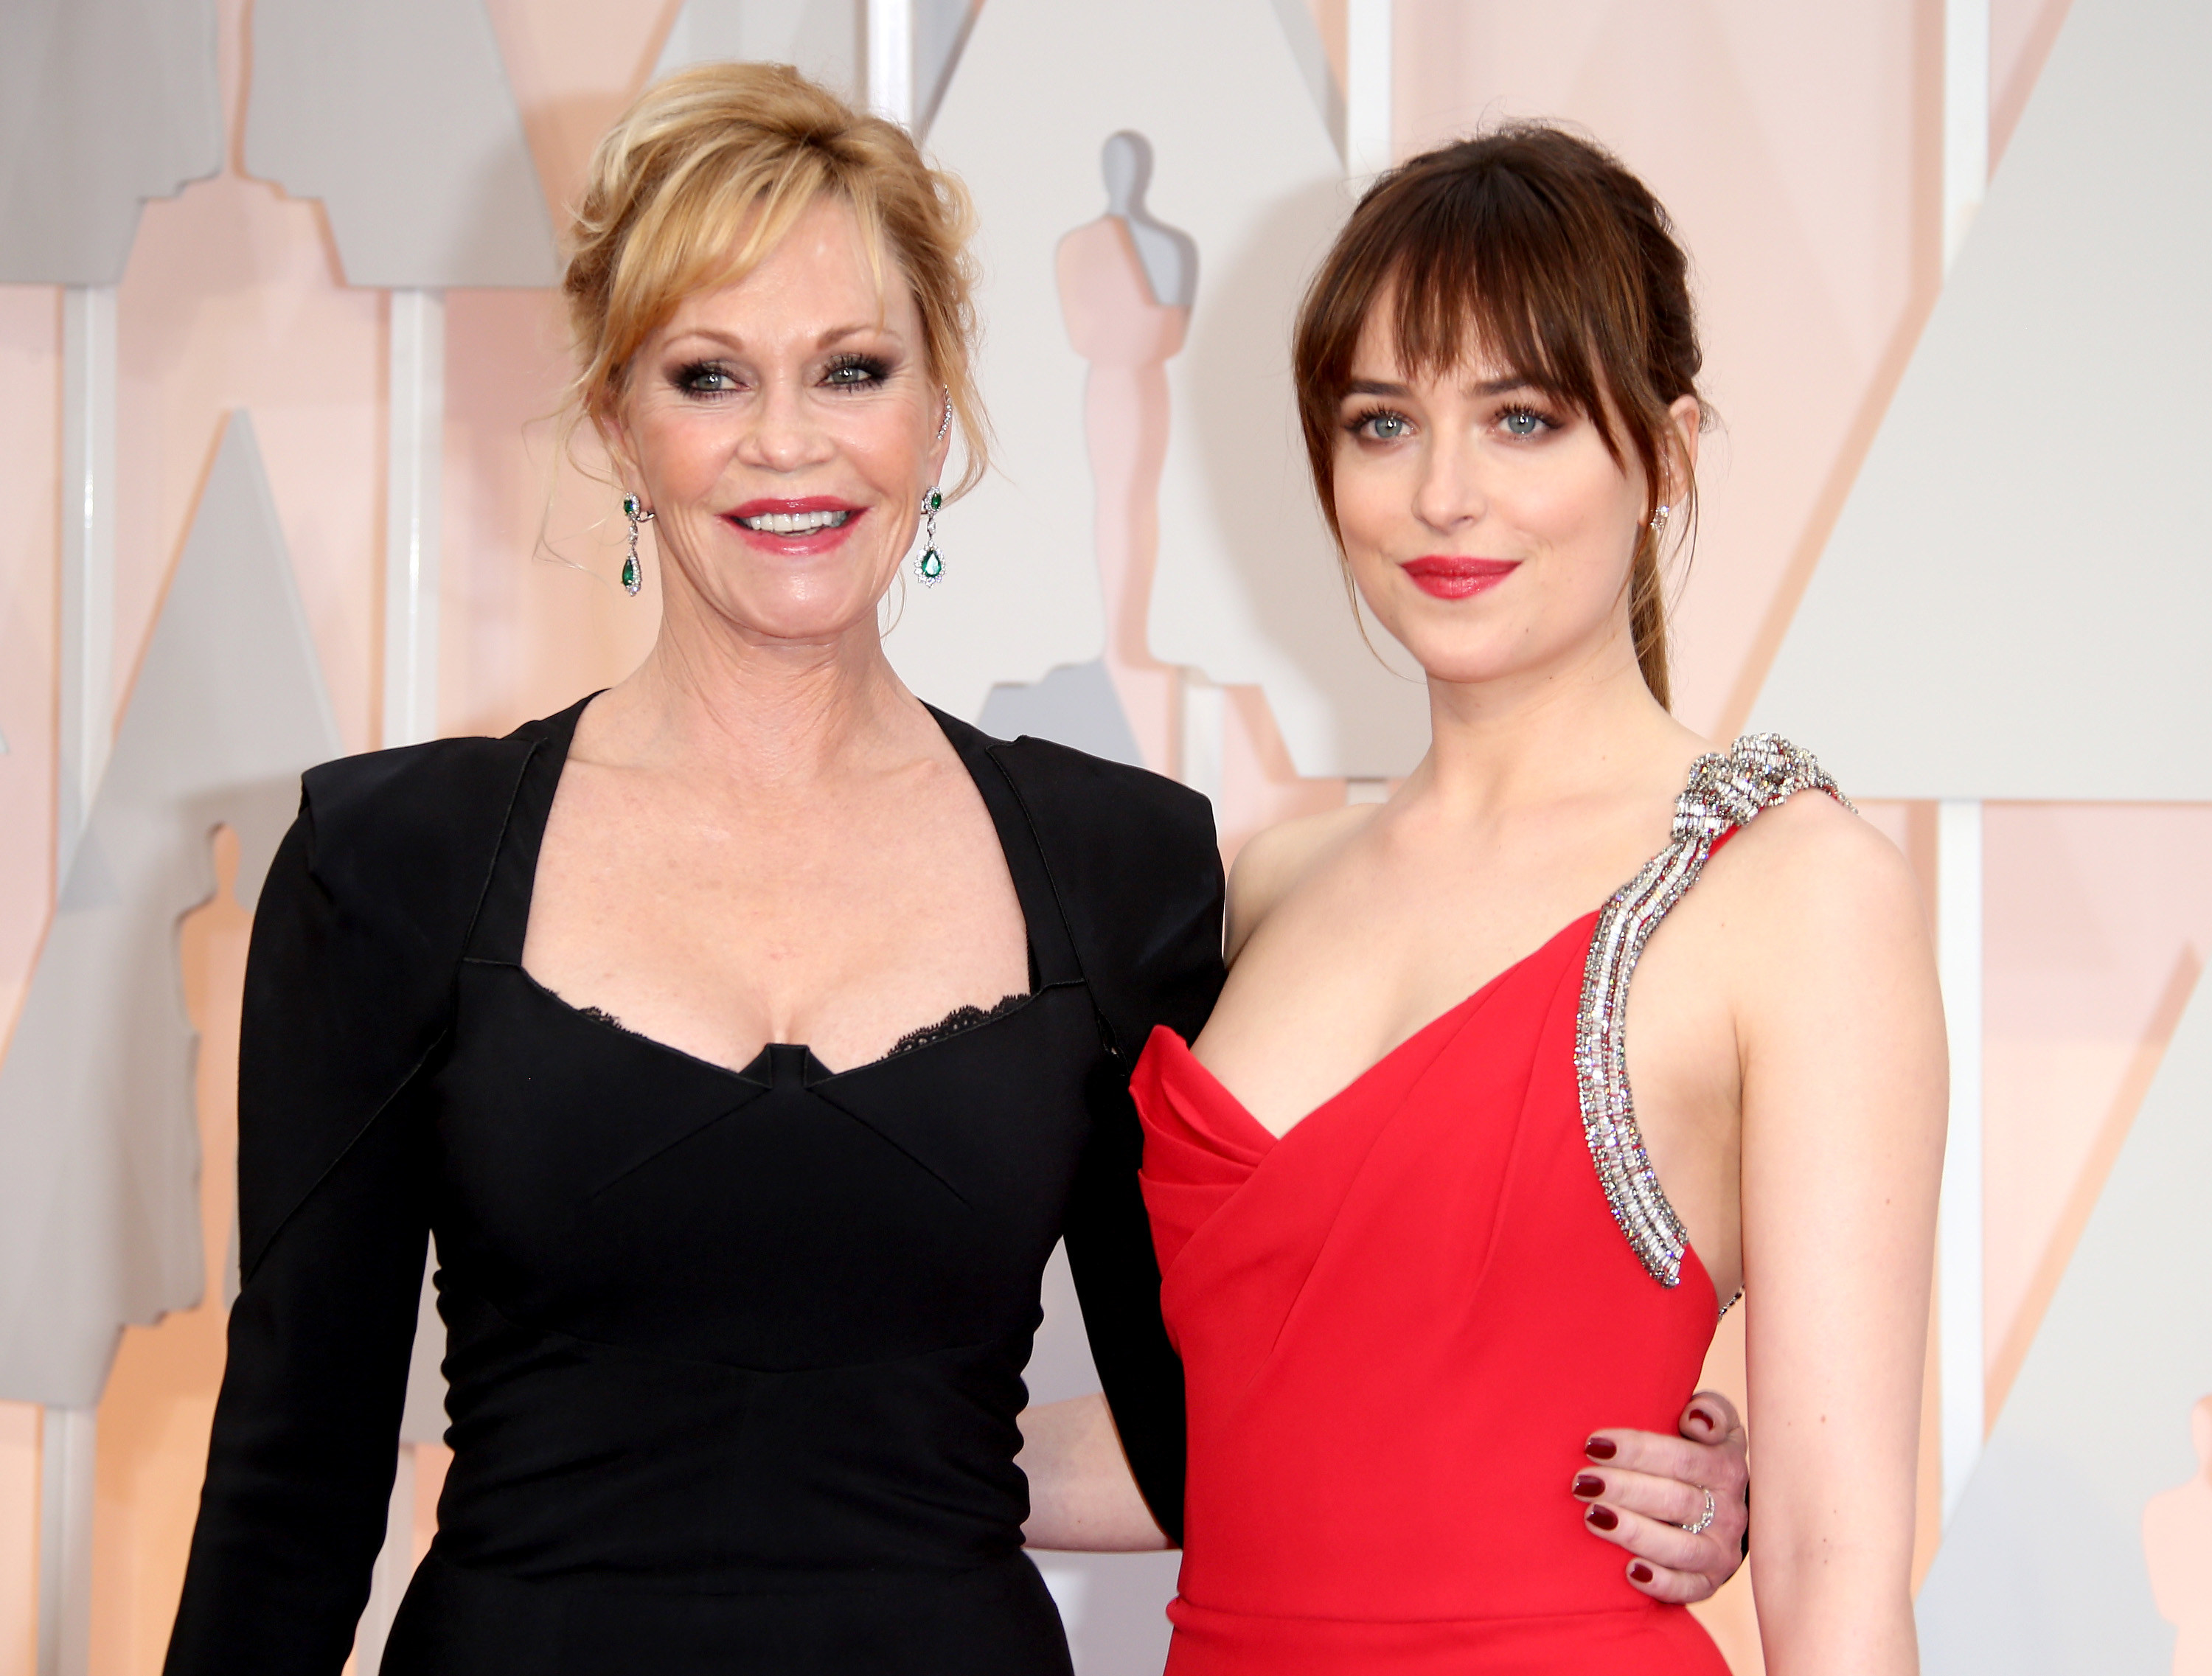 Melanie Griffith and Dakota Johnson in gowns on the red carpet